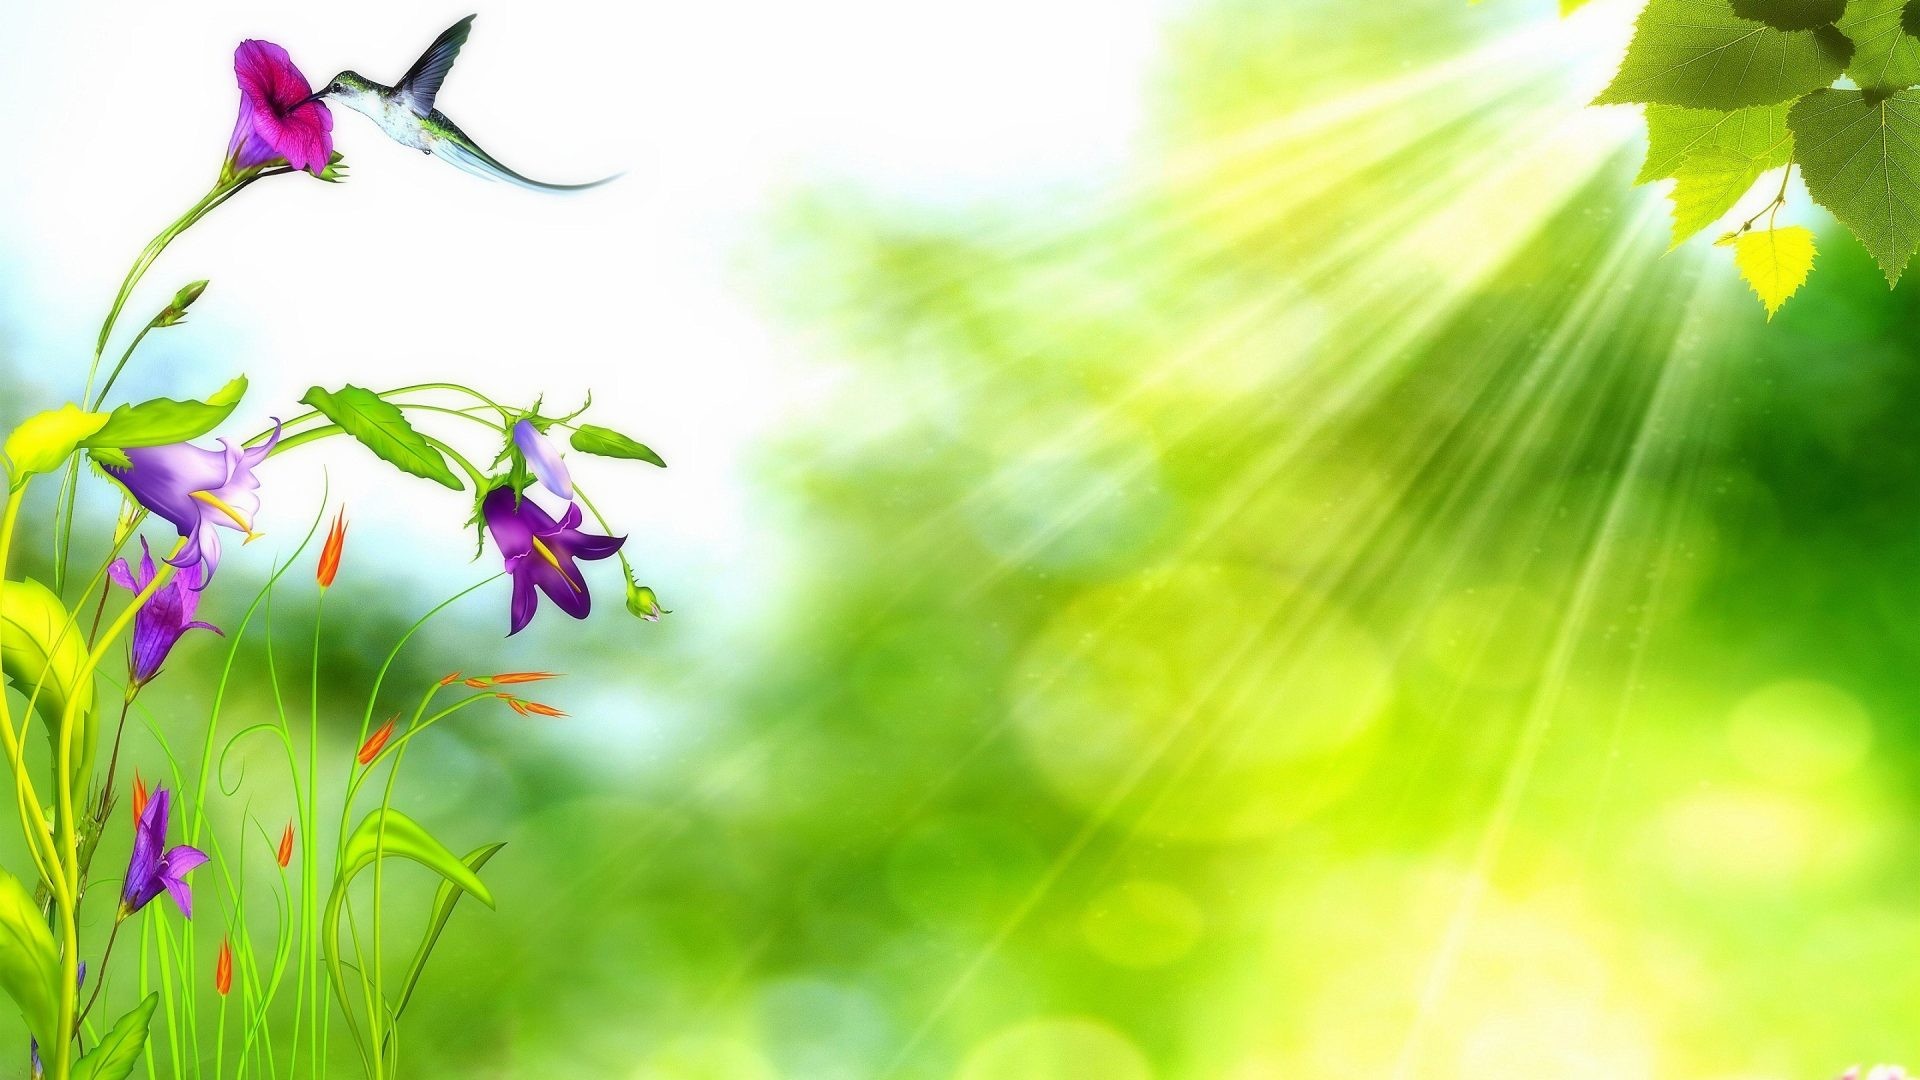 1920x1080 Stock Tag - Stock Flowers Love Hummingbird Pre Bright Seasons Spring Ray  Green Four Leaves Lovely